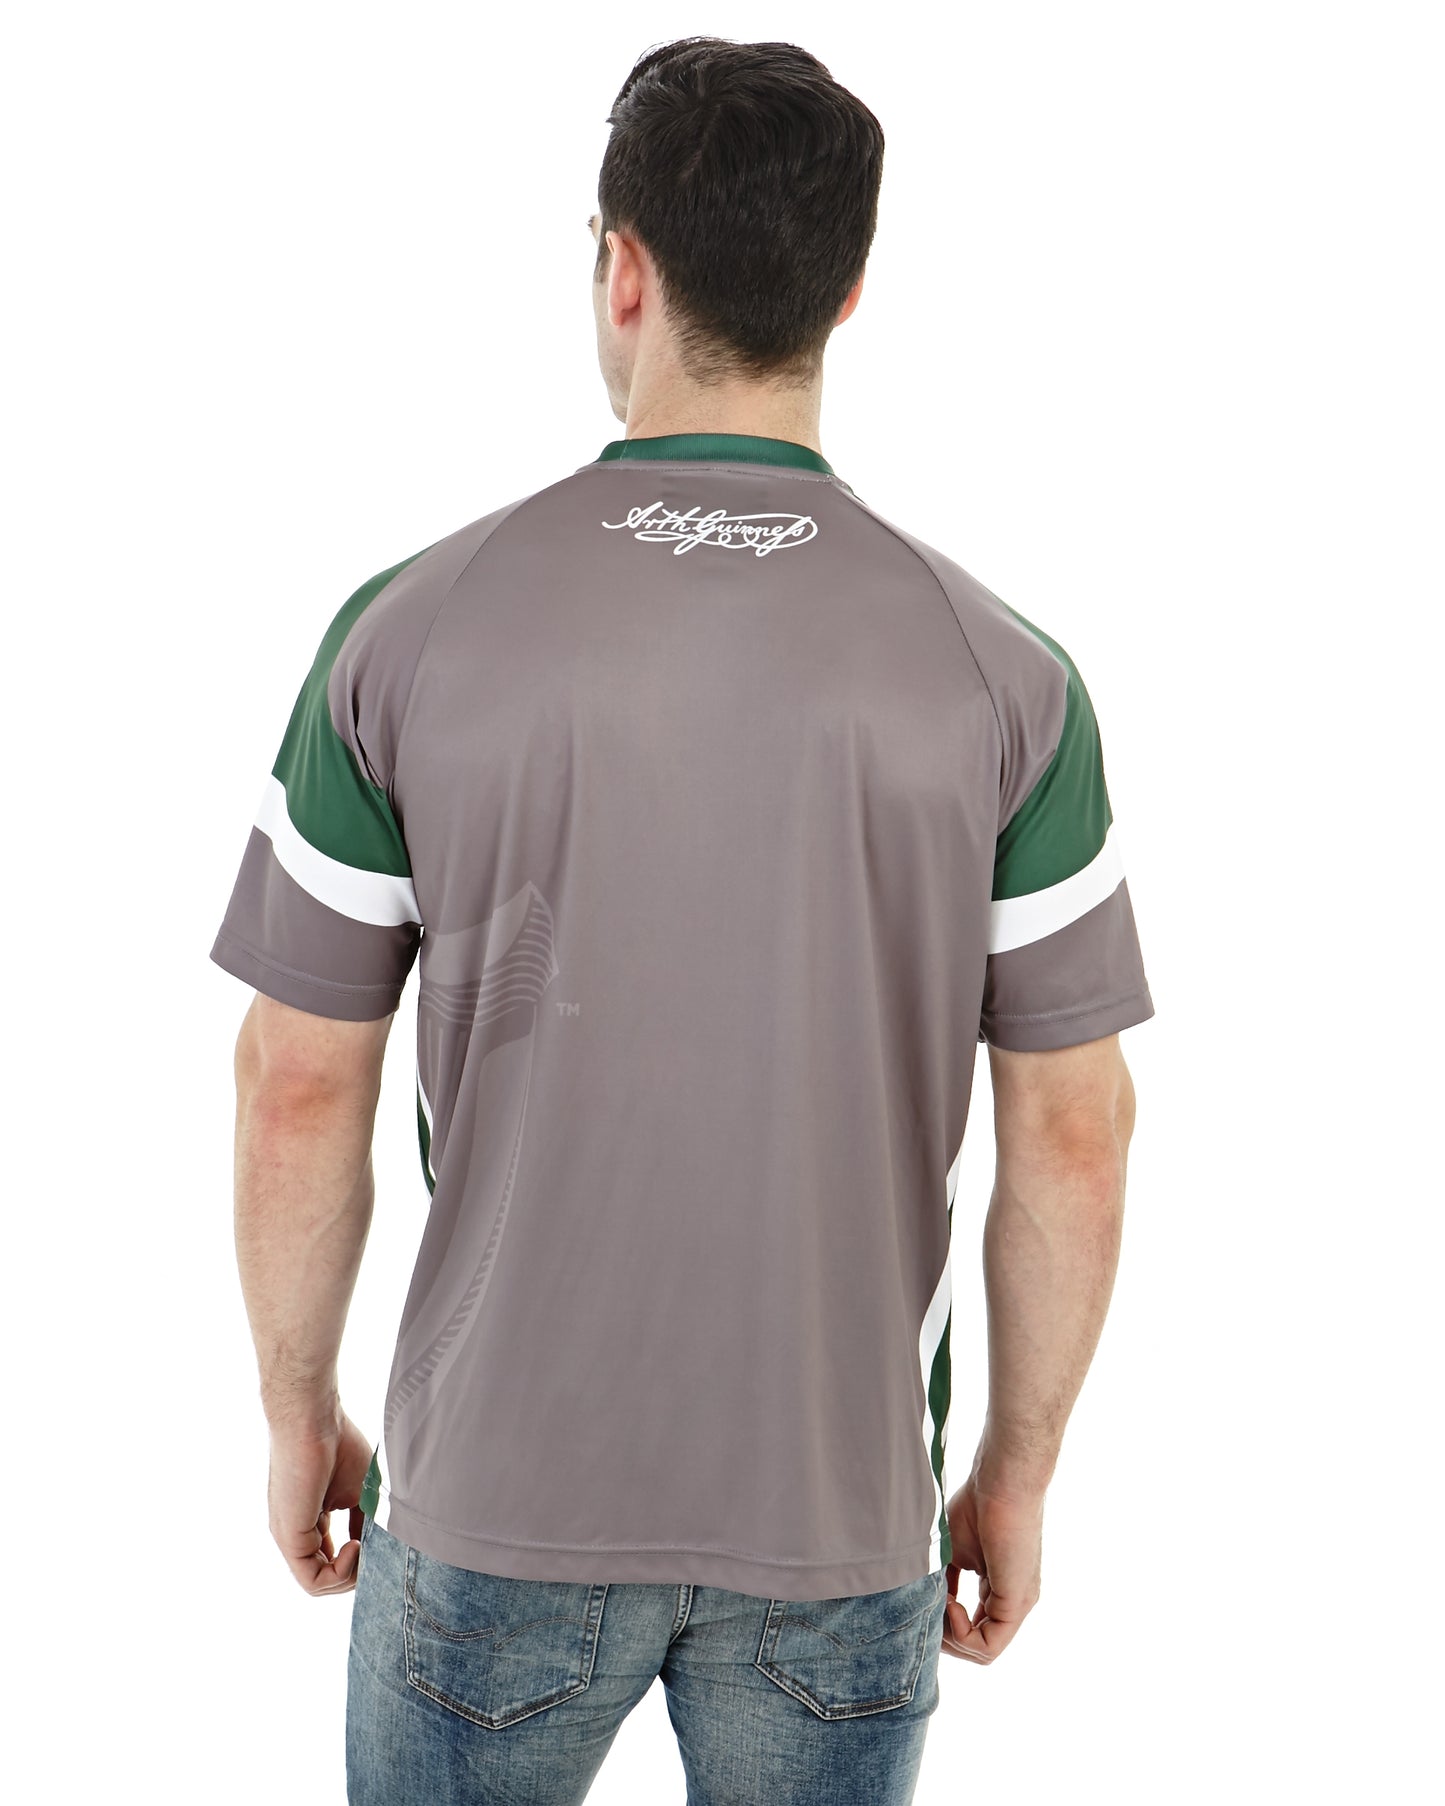 The back of a Guinness® soccer fan wearing a grey and green Guinness Performance Football Jersey.